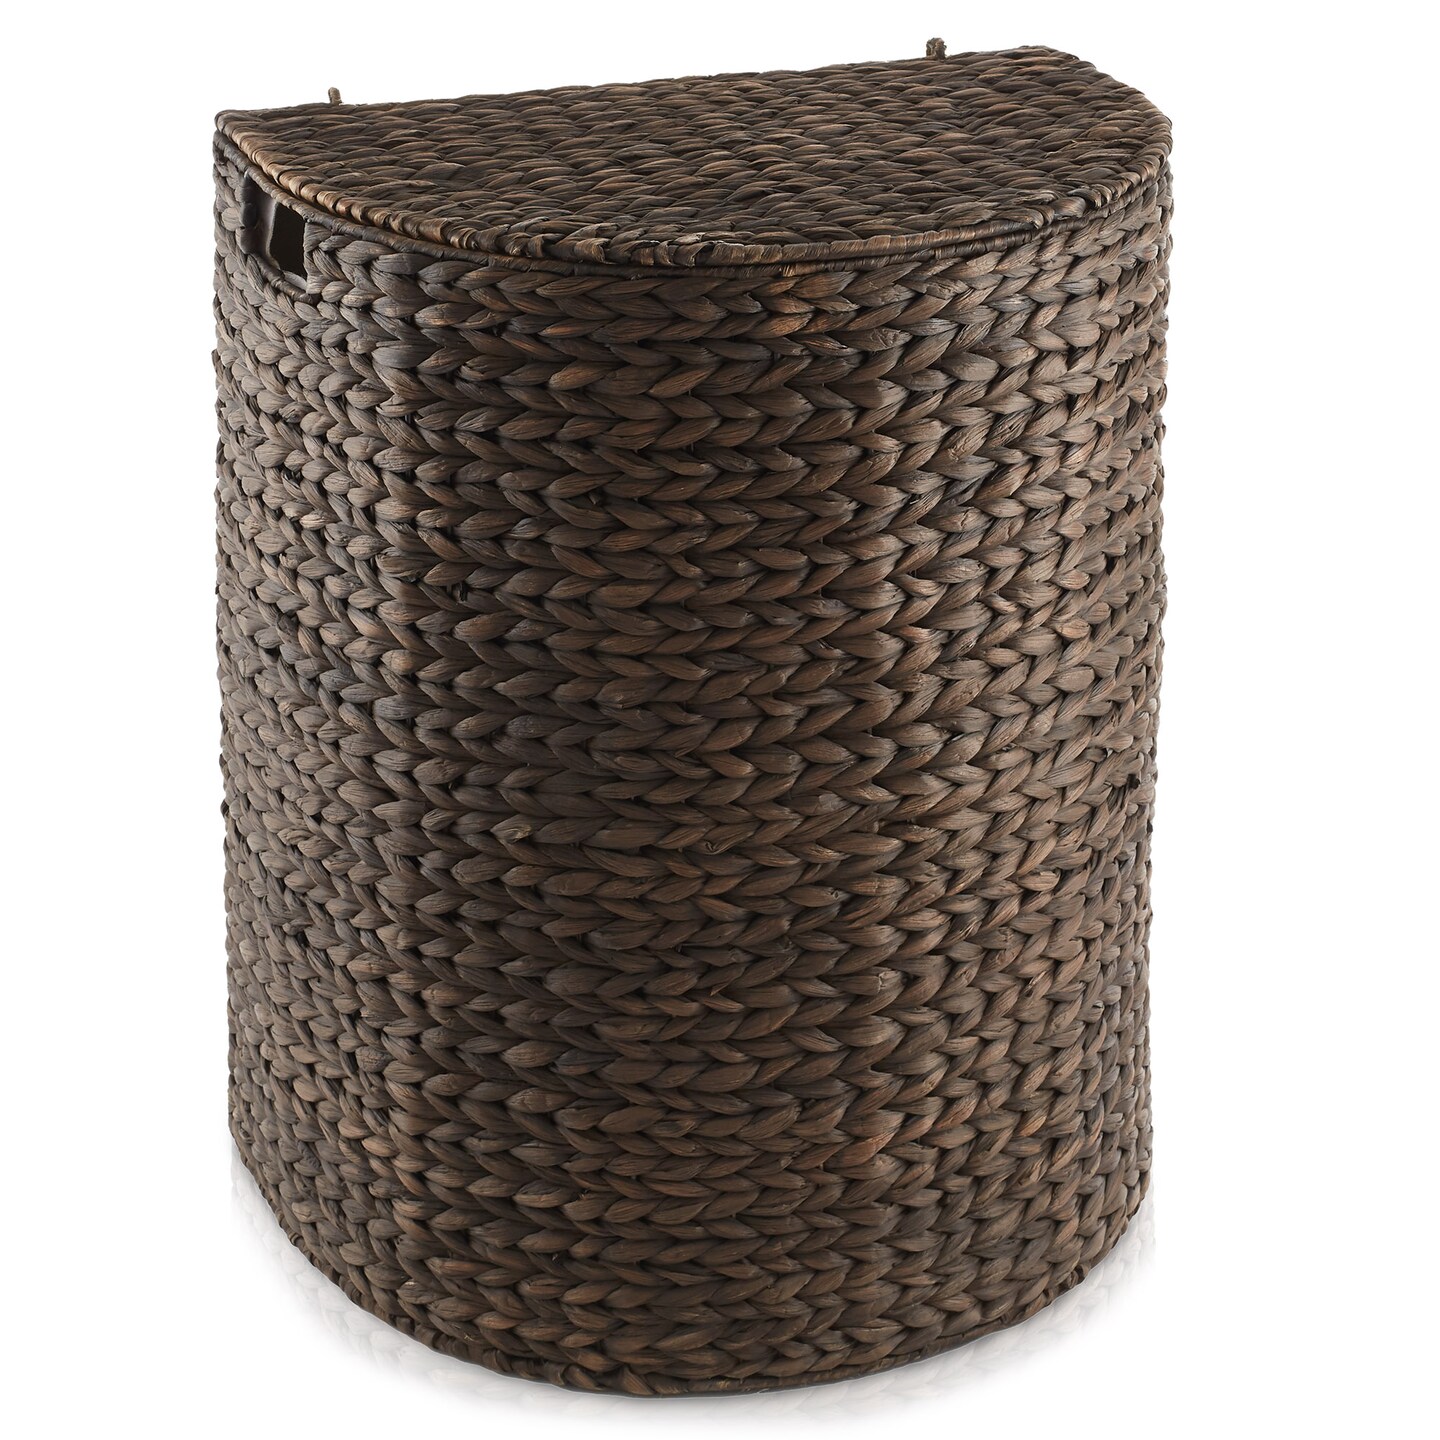 Casafield Half Moon Laundry Hamper with Lid and Removable Liner Bag, Woven Water Hyacinth Laundry Basket for Clothes and Towels